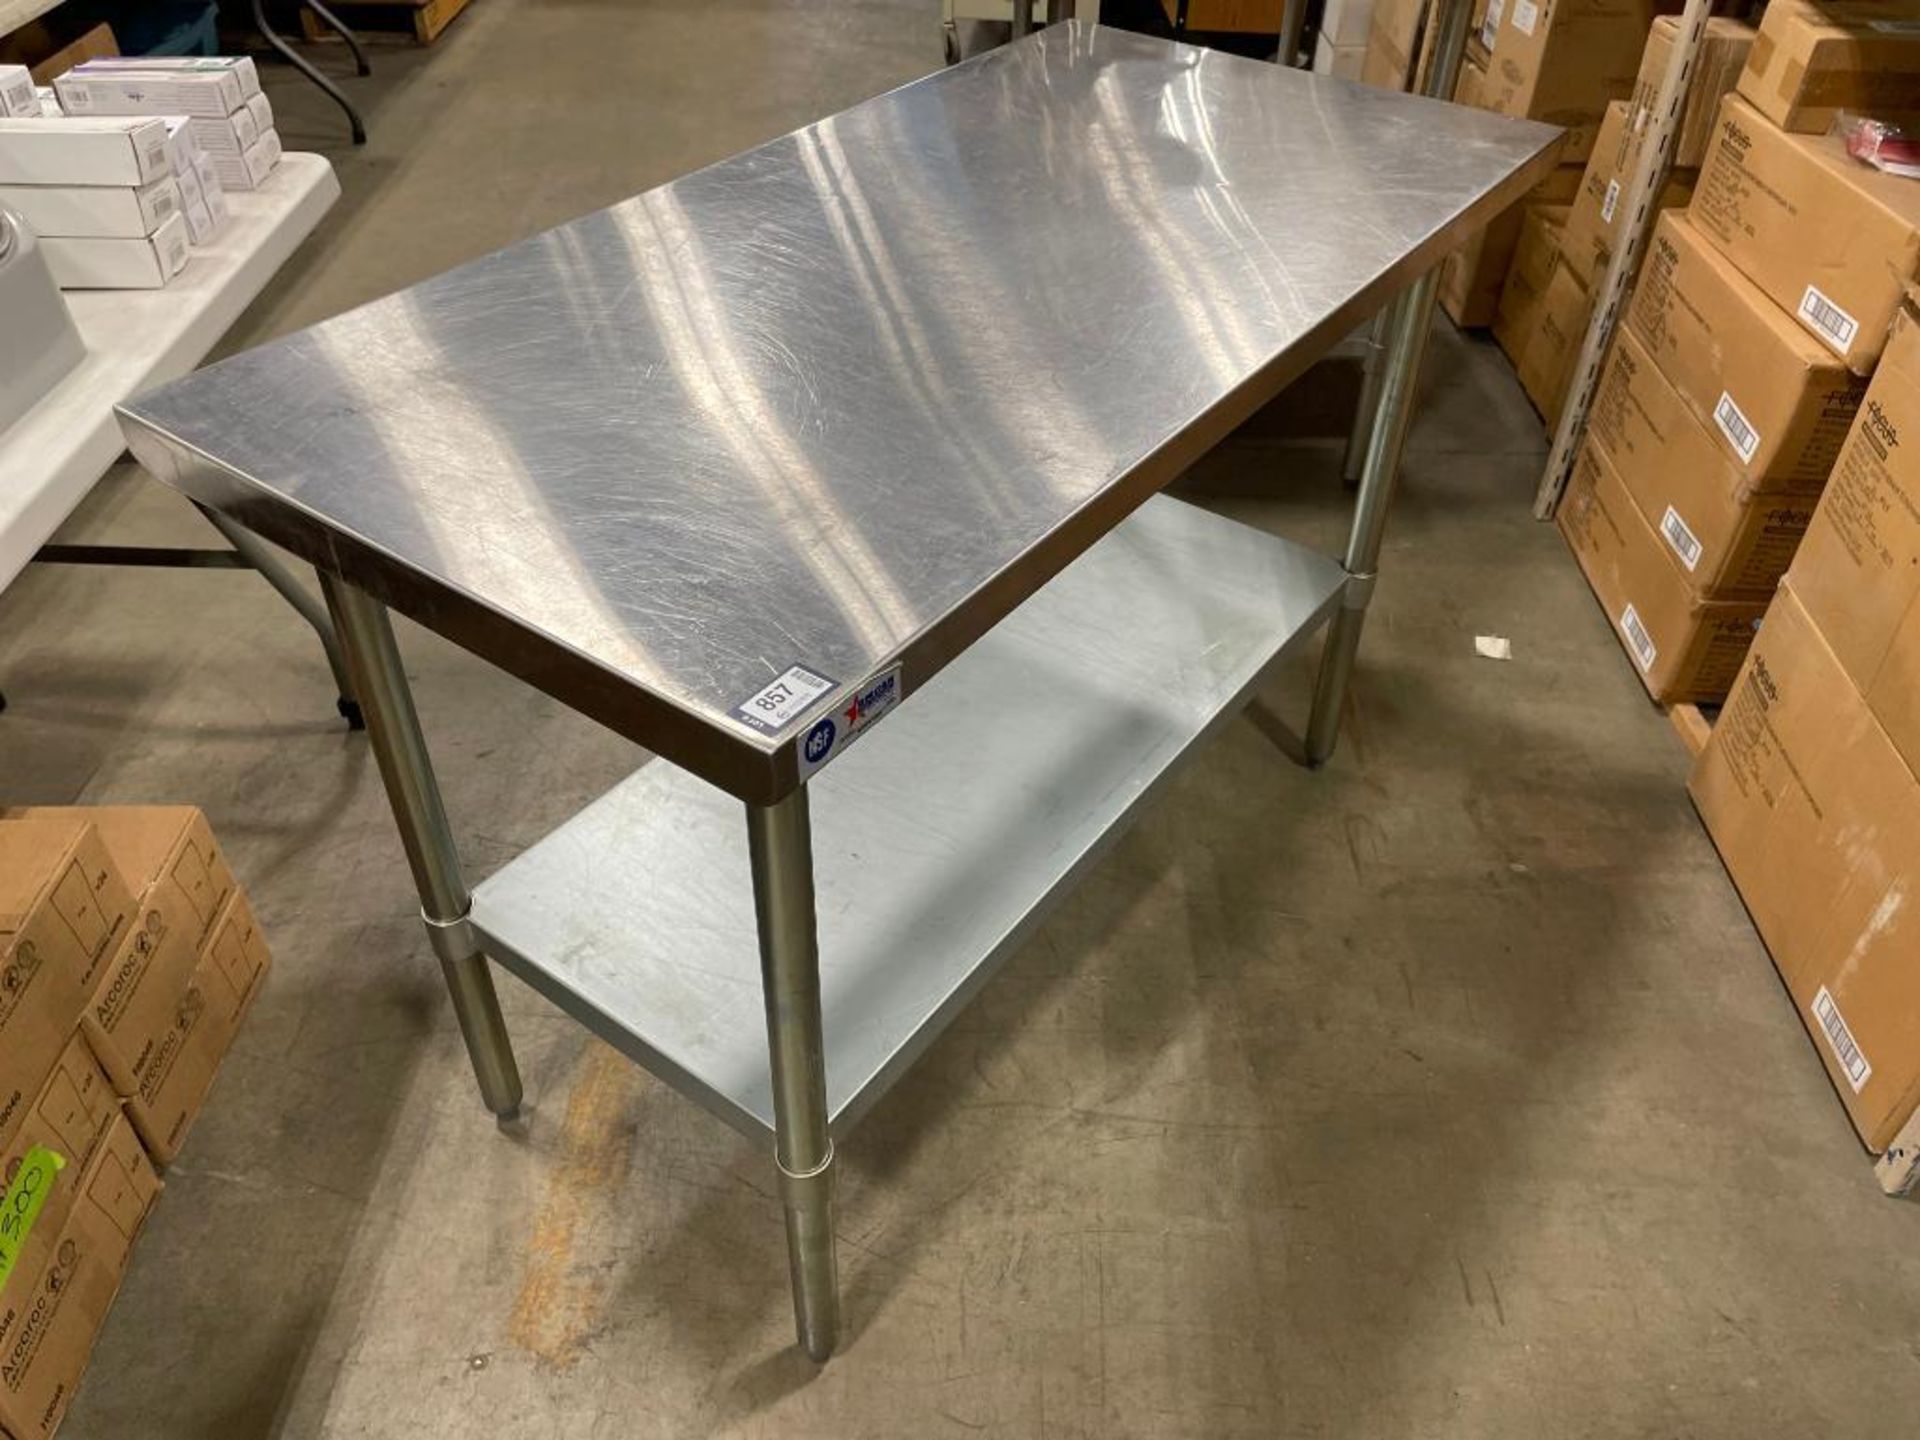 48" X 24" STAINLESS STEEL WORK TABLE - Image 2 of 5